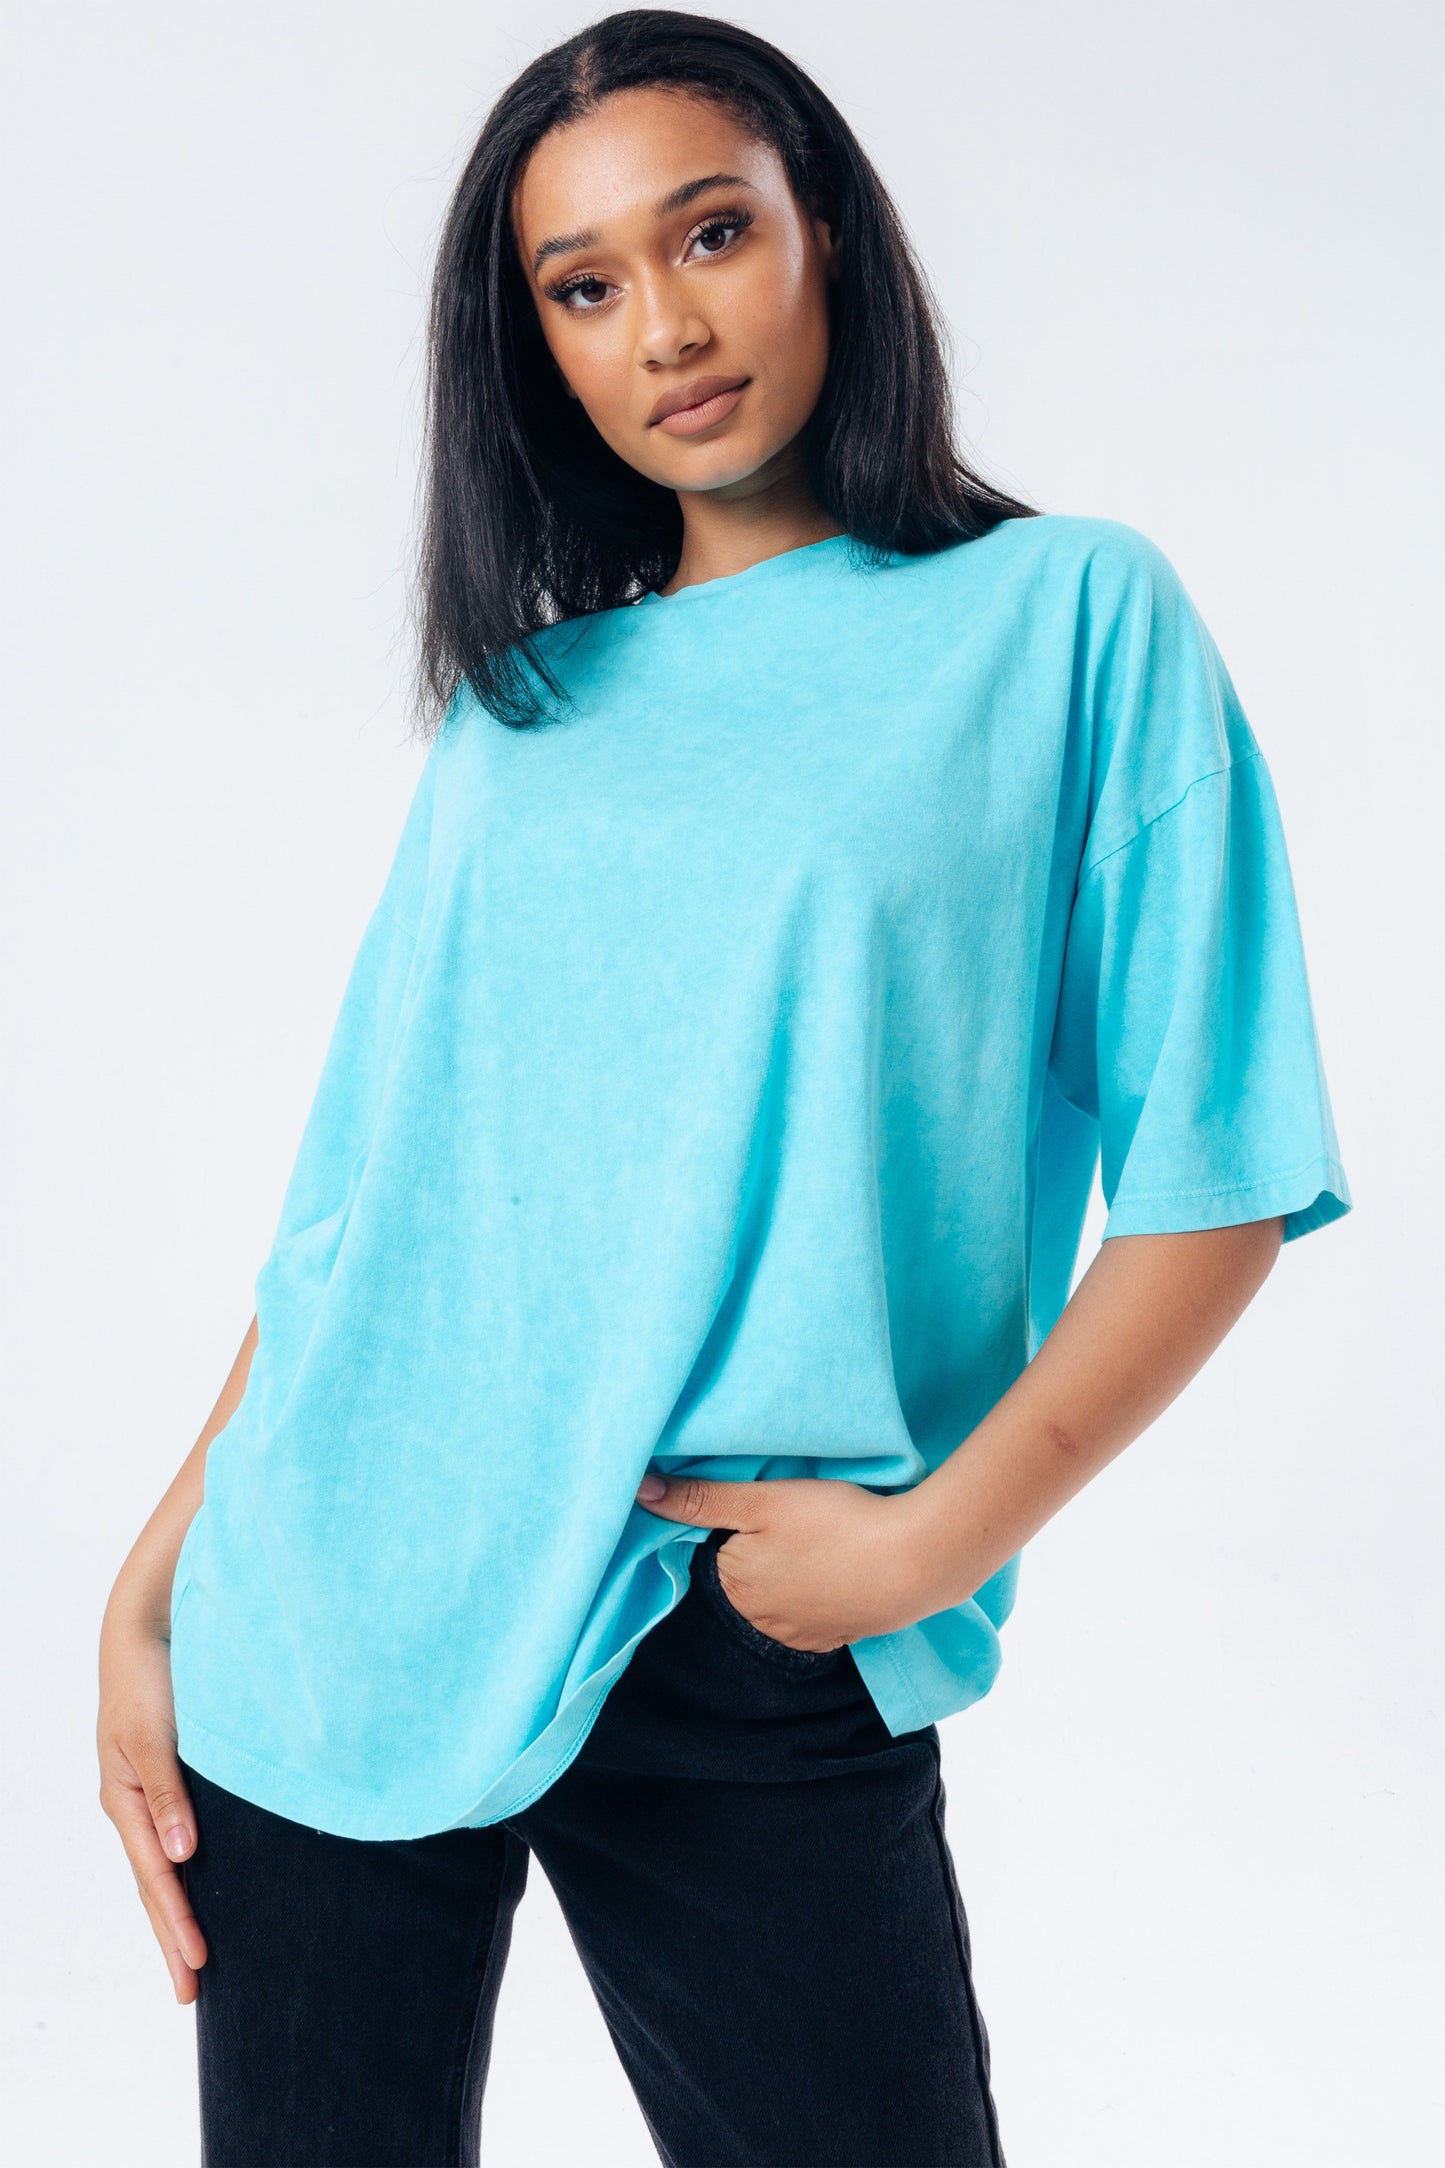 HYPE TEAL VINTAGE WOMEN'S BOXY FIT T-SHIRT